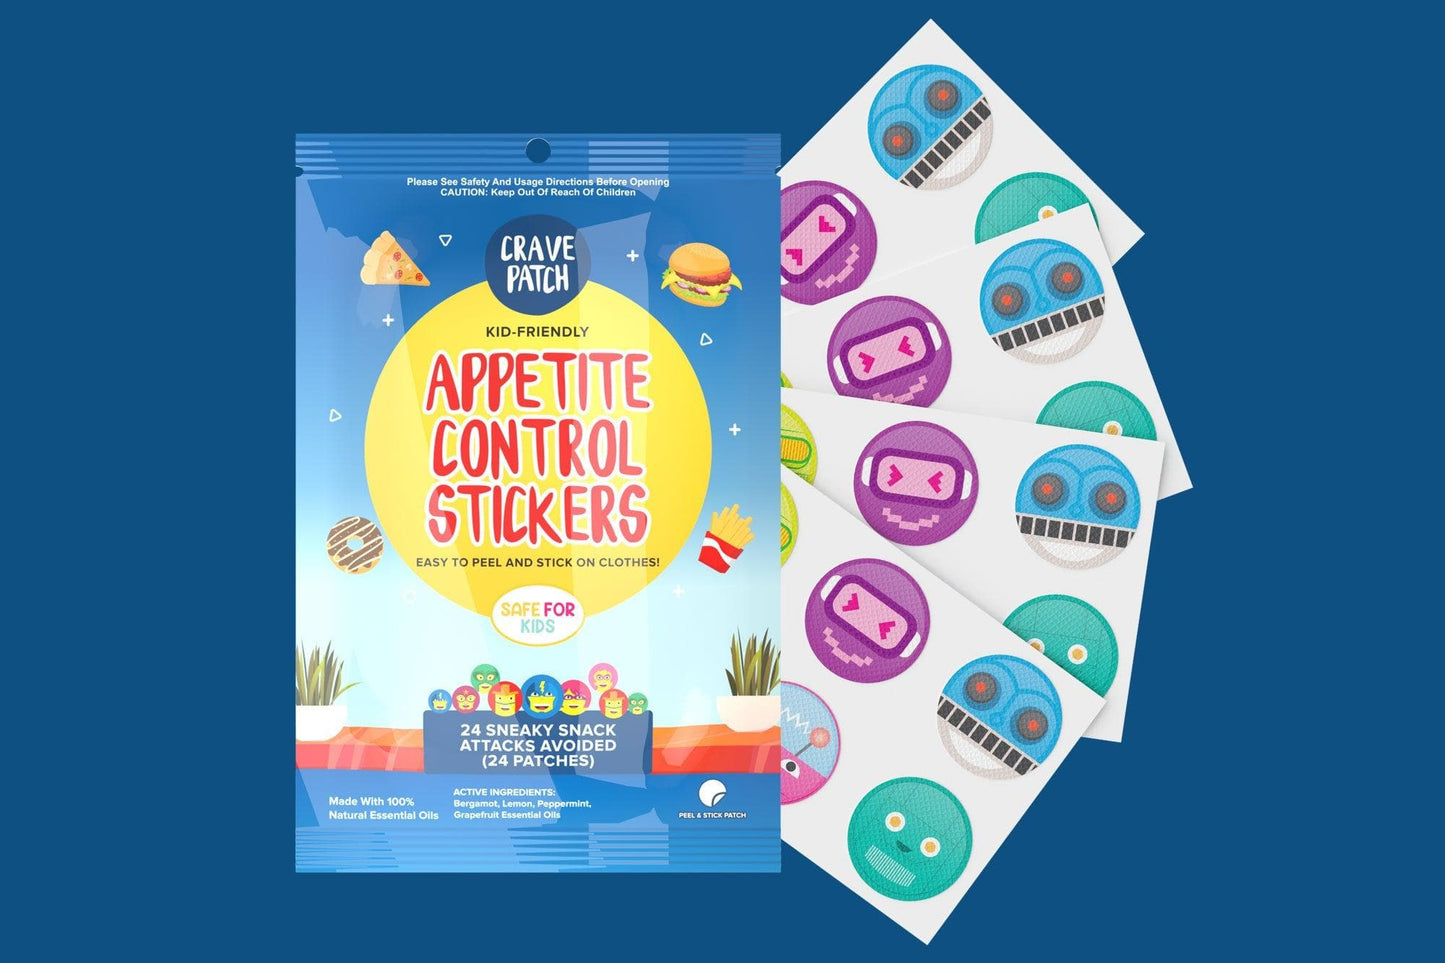 30 x CravePatch Appetite Control Stickers individual resale packets in a Retail Display Box*